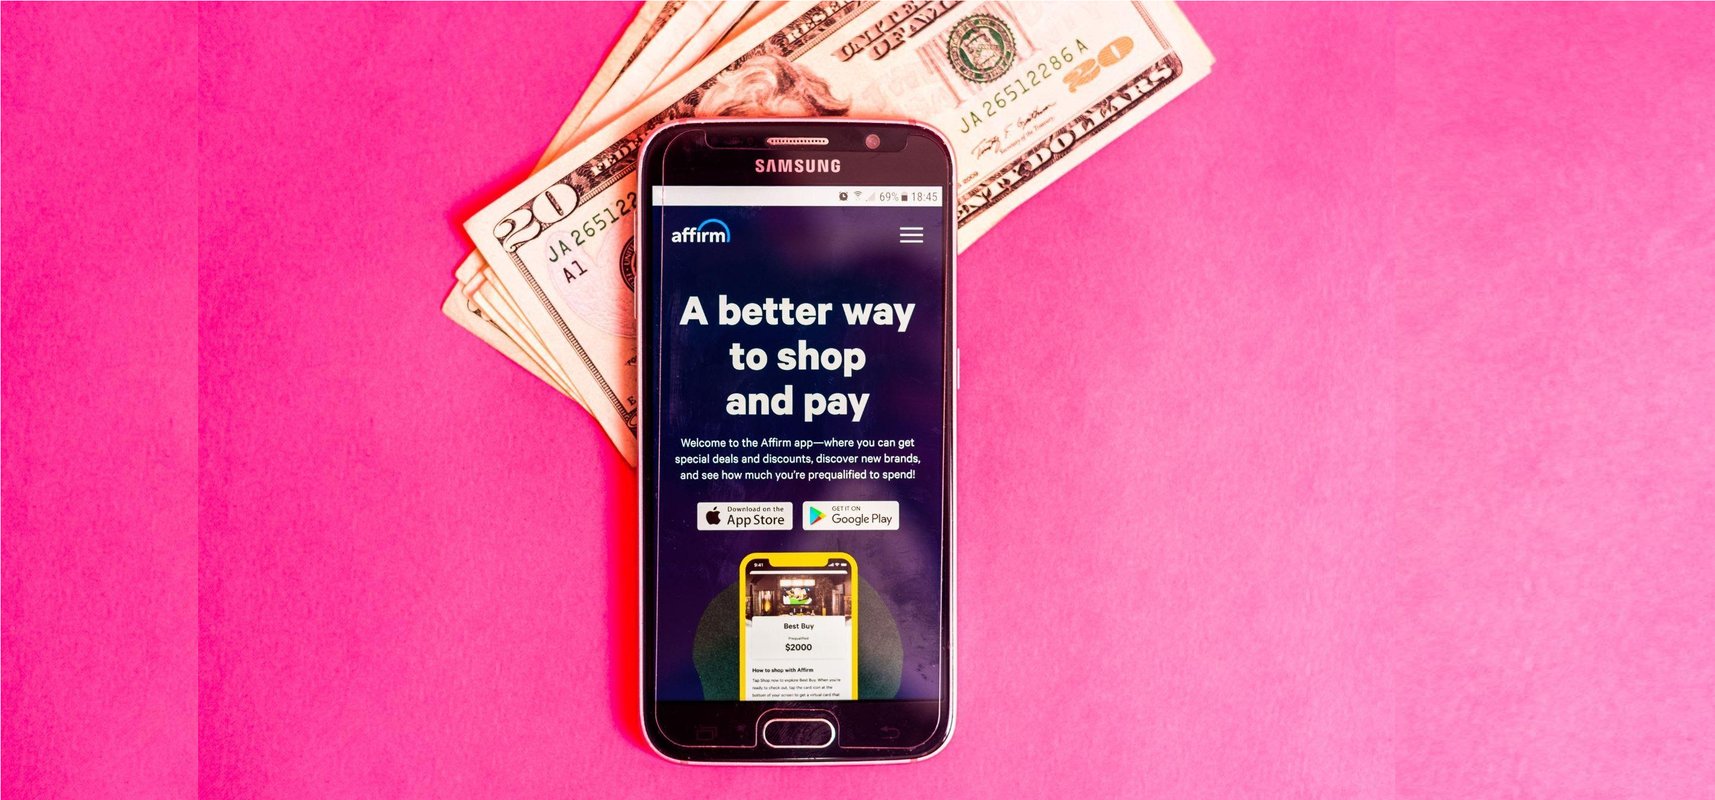 A few notes are placed on a pink background with a mobile phone displaying the Affirm Holdings Inc. app.